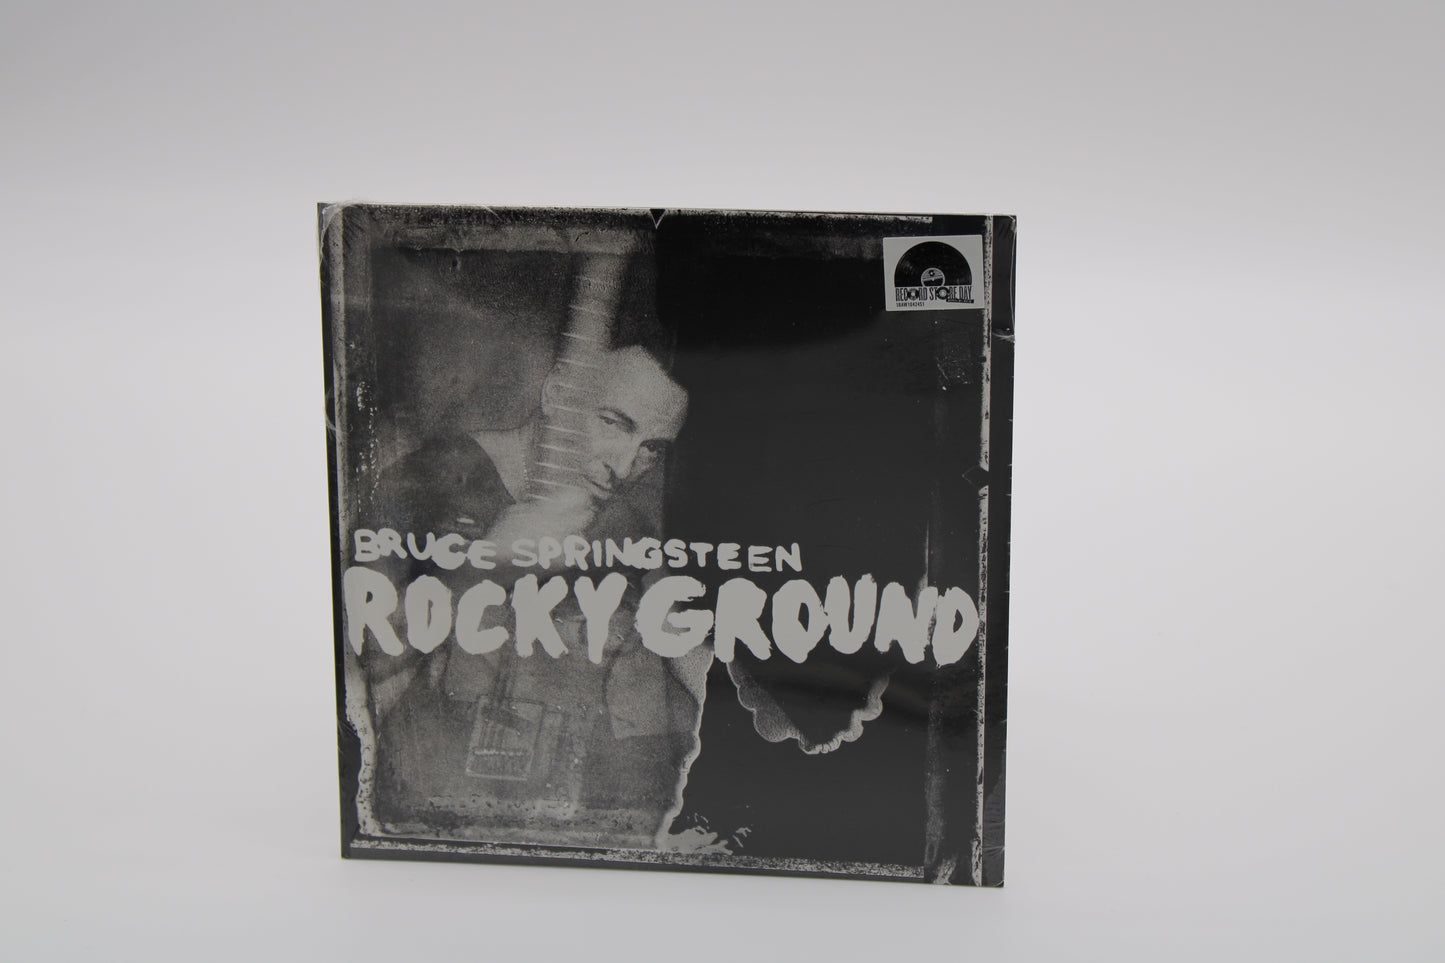 Bruce Springsteen SEALED The Promise (Live) and Rocky Ground - 7" Record Store Day - Sealed Collectible